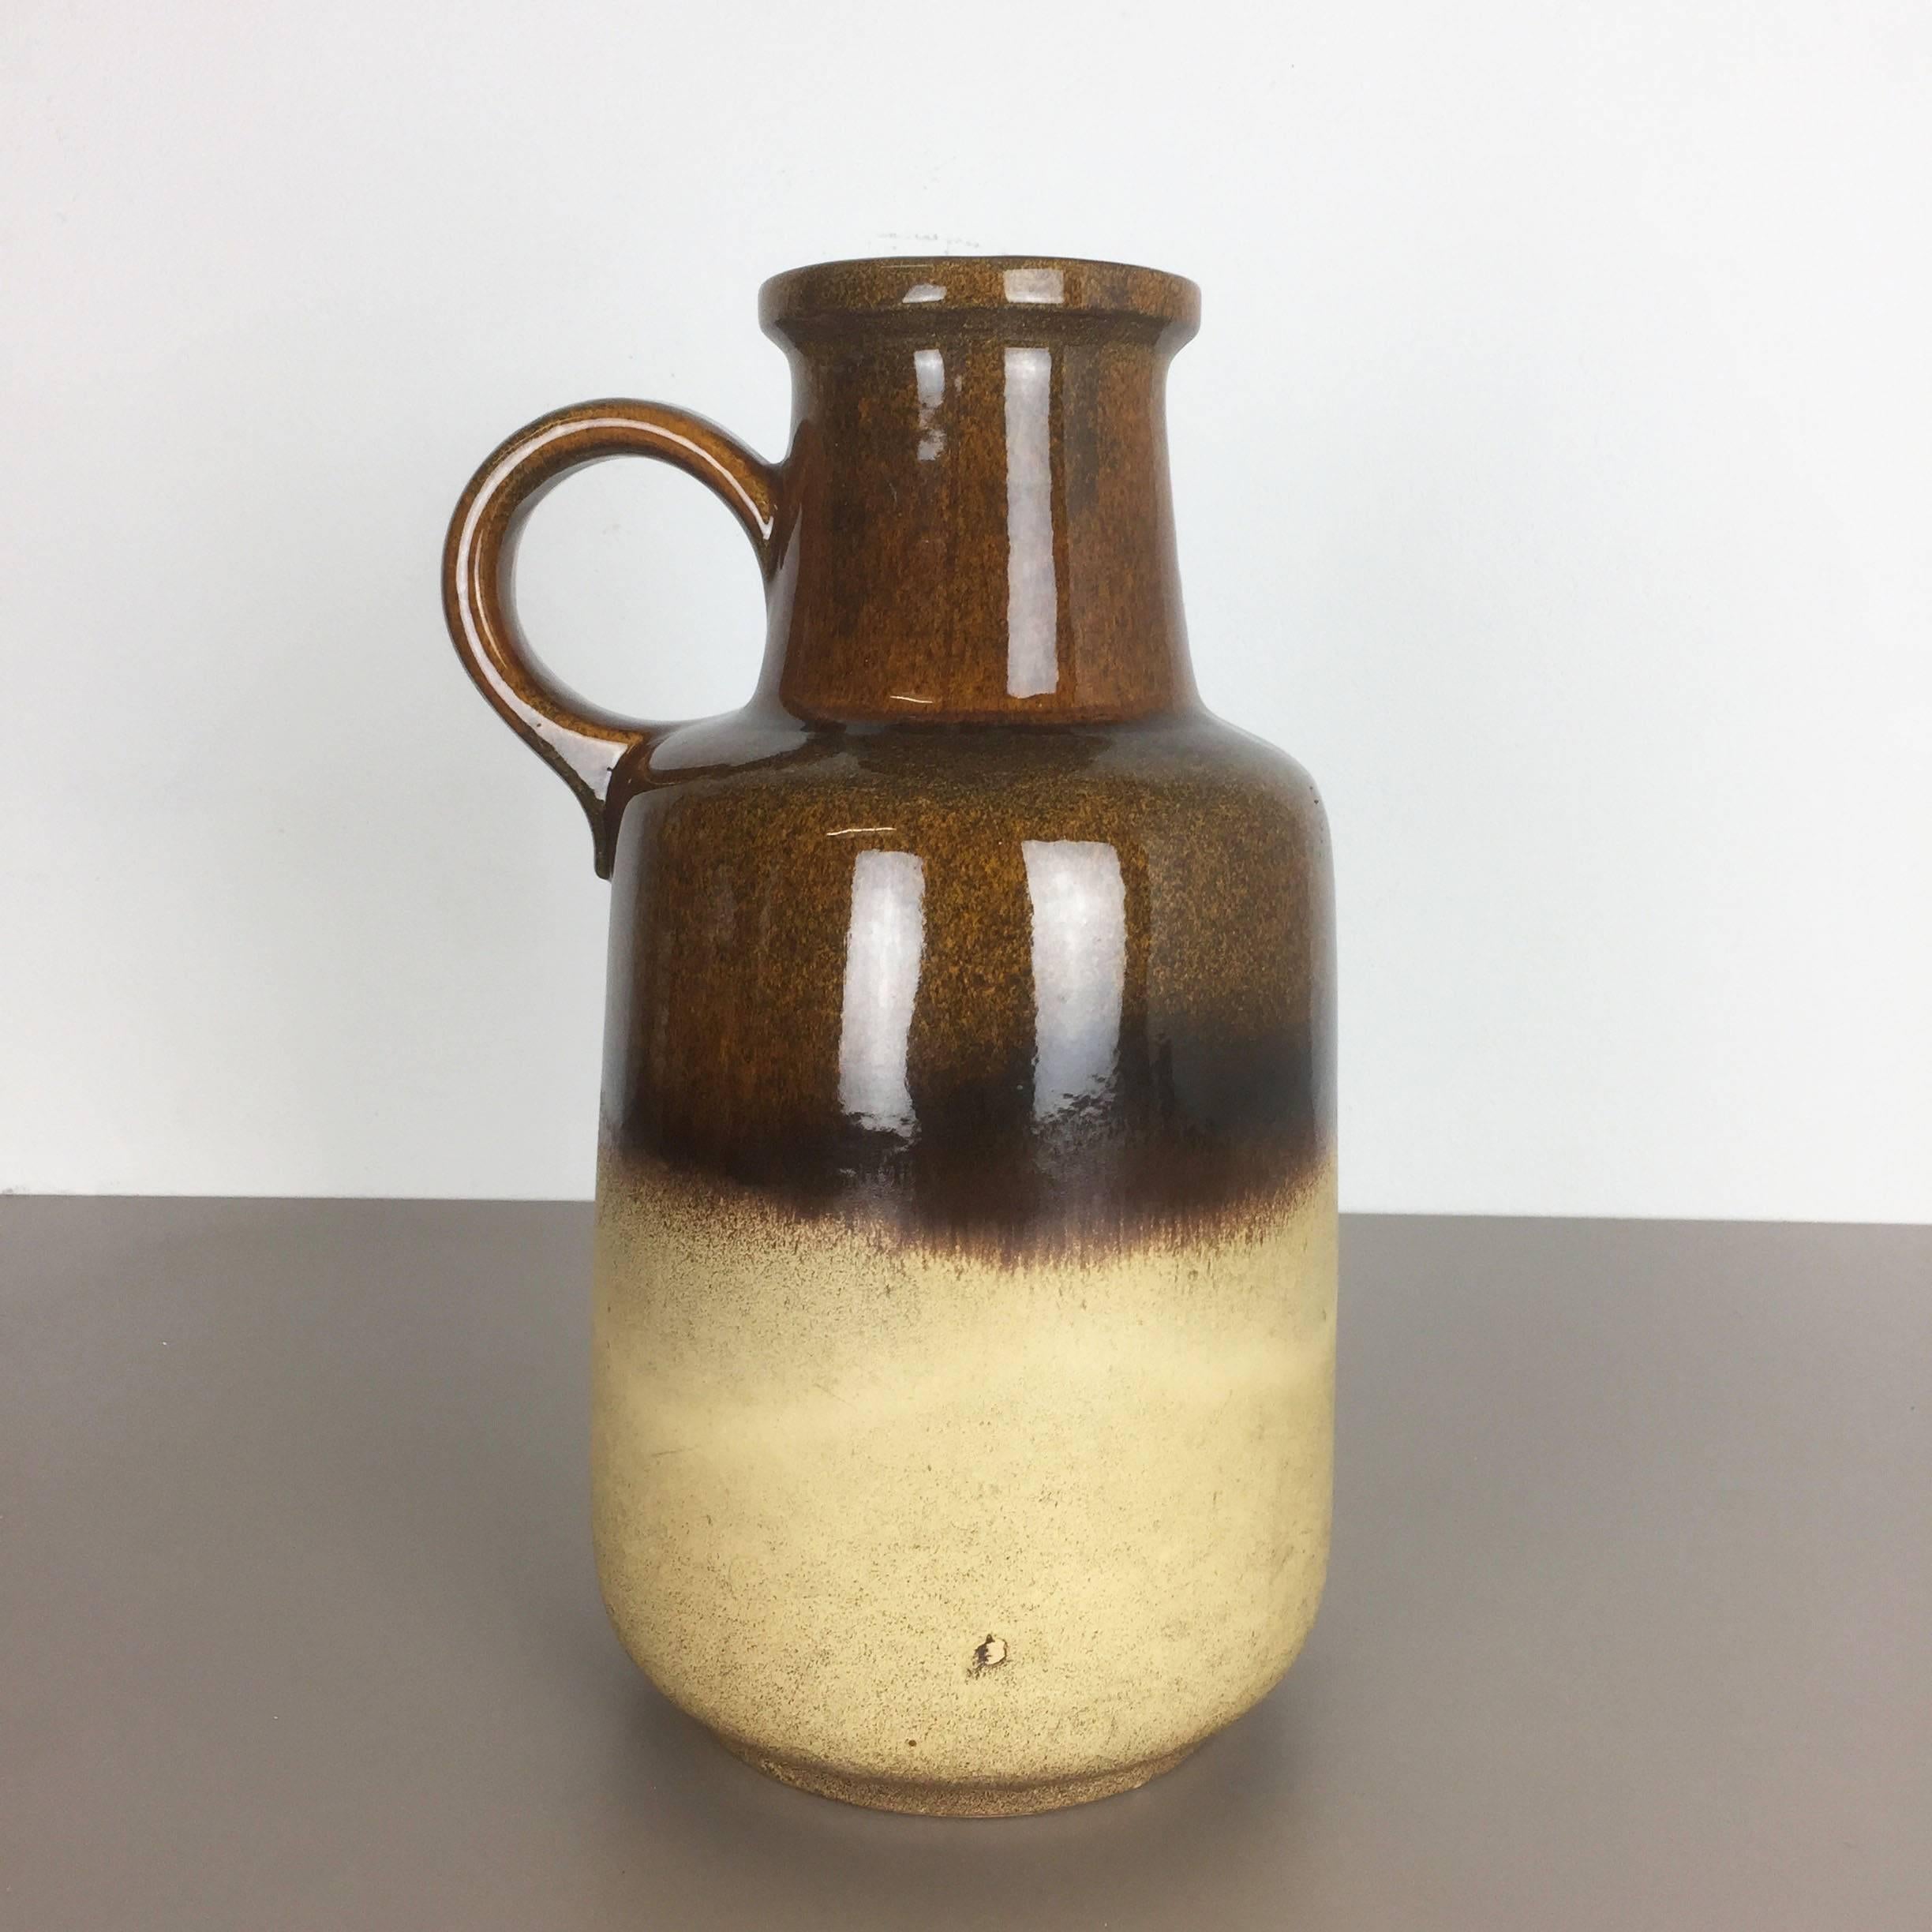 Article:

Extra large fat lava art vase. 

Measures: 40cm



Model: 

408 40



Producer:

Scheurich, Germany



Decade:

1970s


 

This original vintage vase was produced in the 1970s in Germany. it is made of ceramic